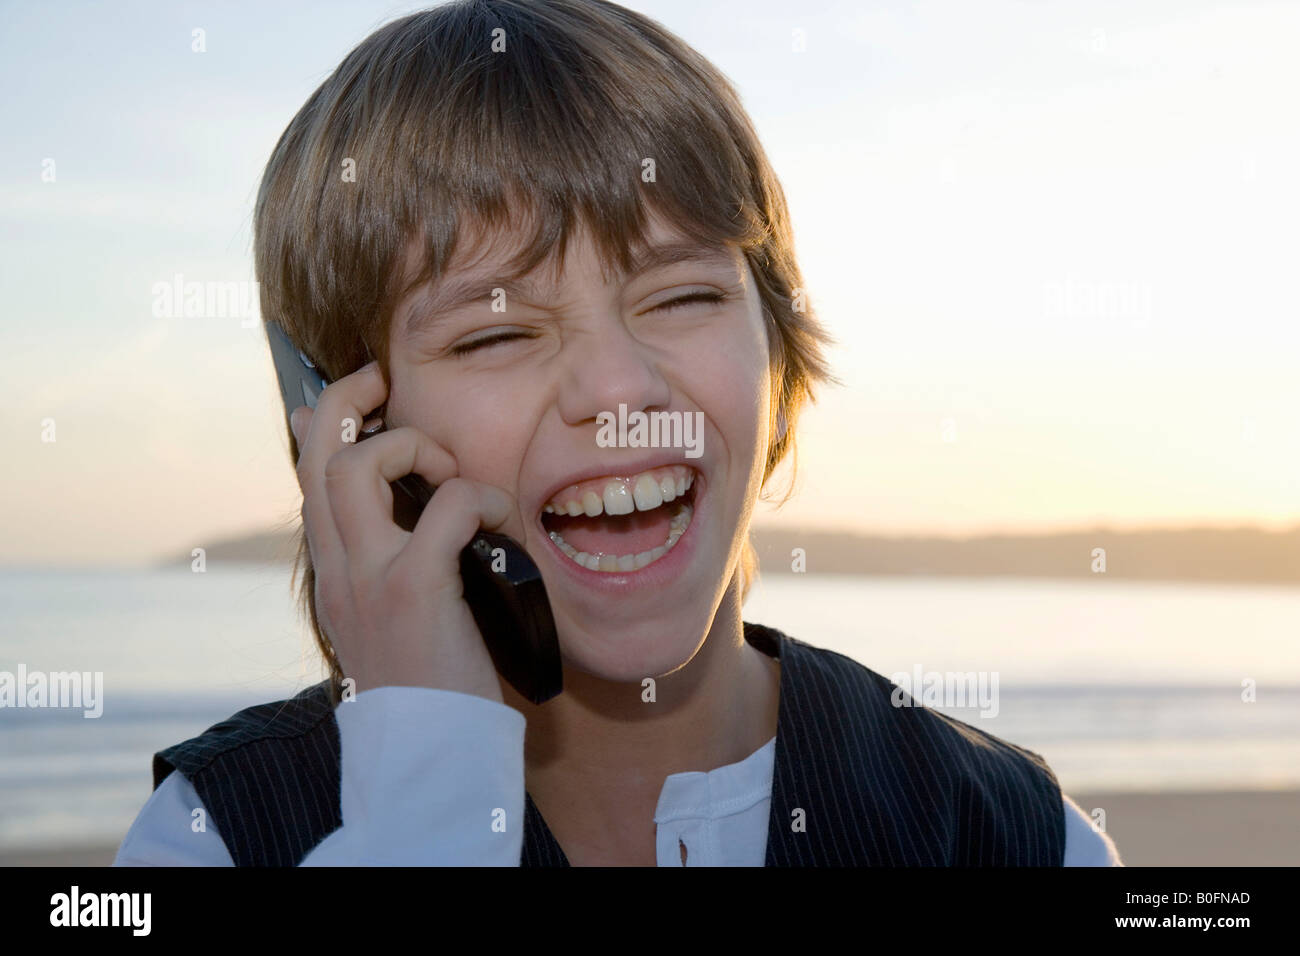 Young boy on cell phone Stock Photo